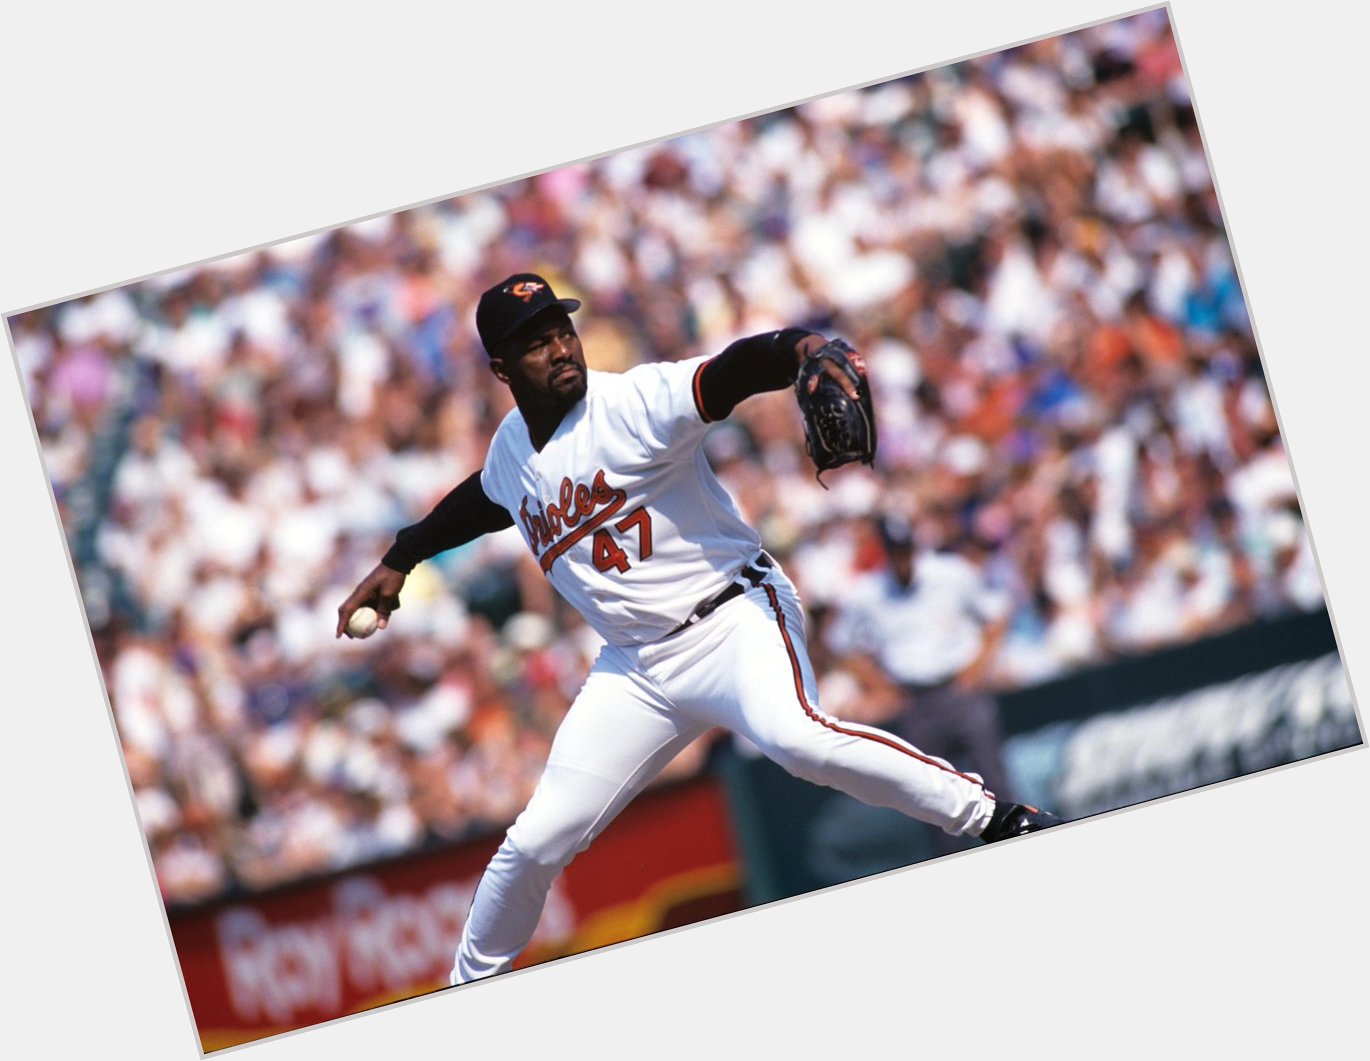 Happy birthday to of Famer, Lee Smith. 